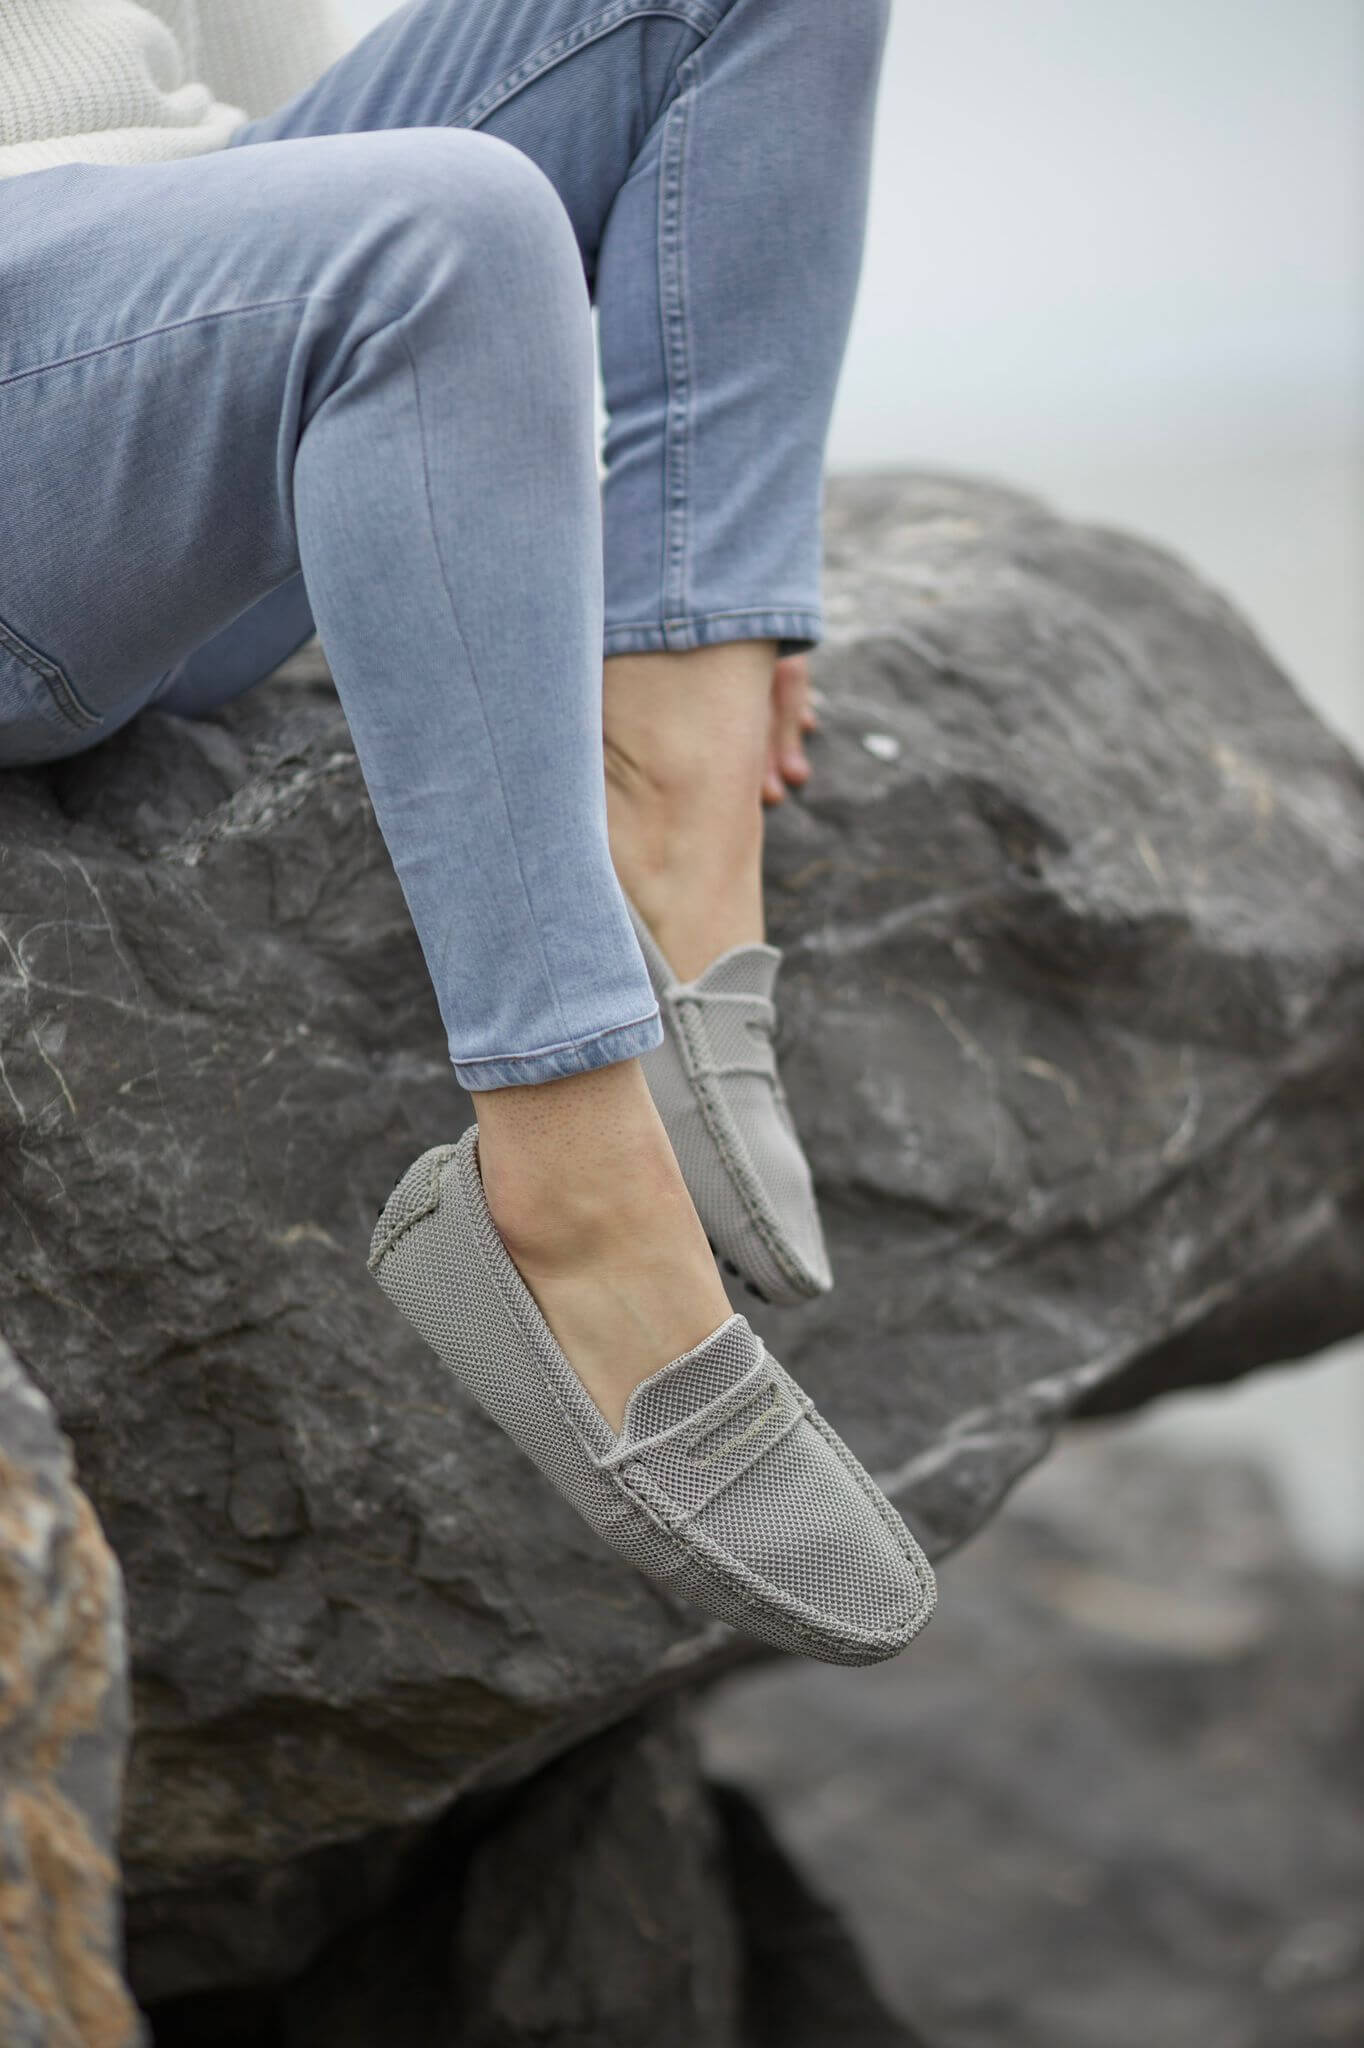 A Gray Driving Loafer on display.